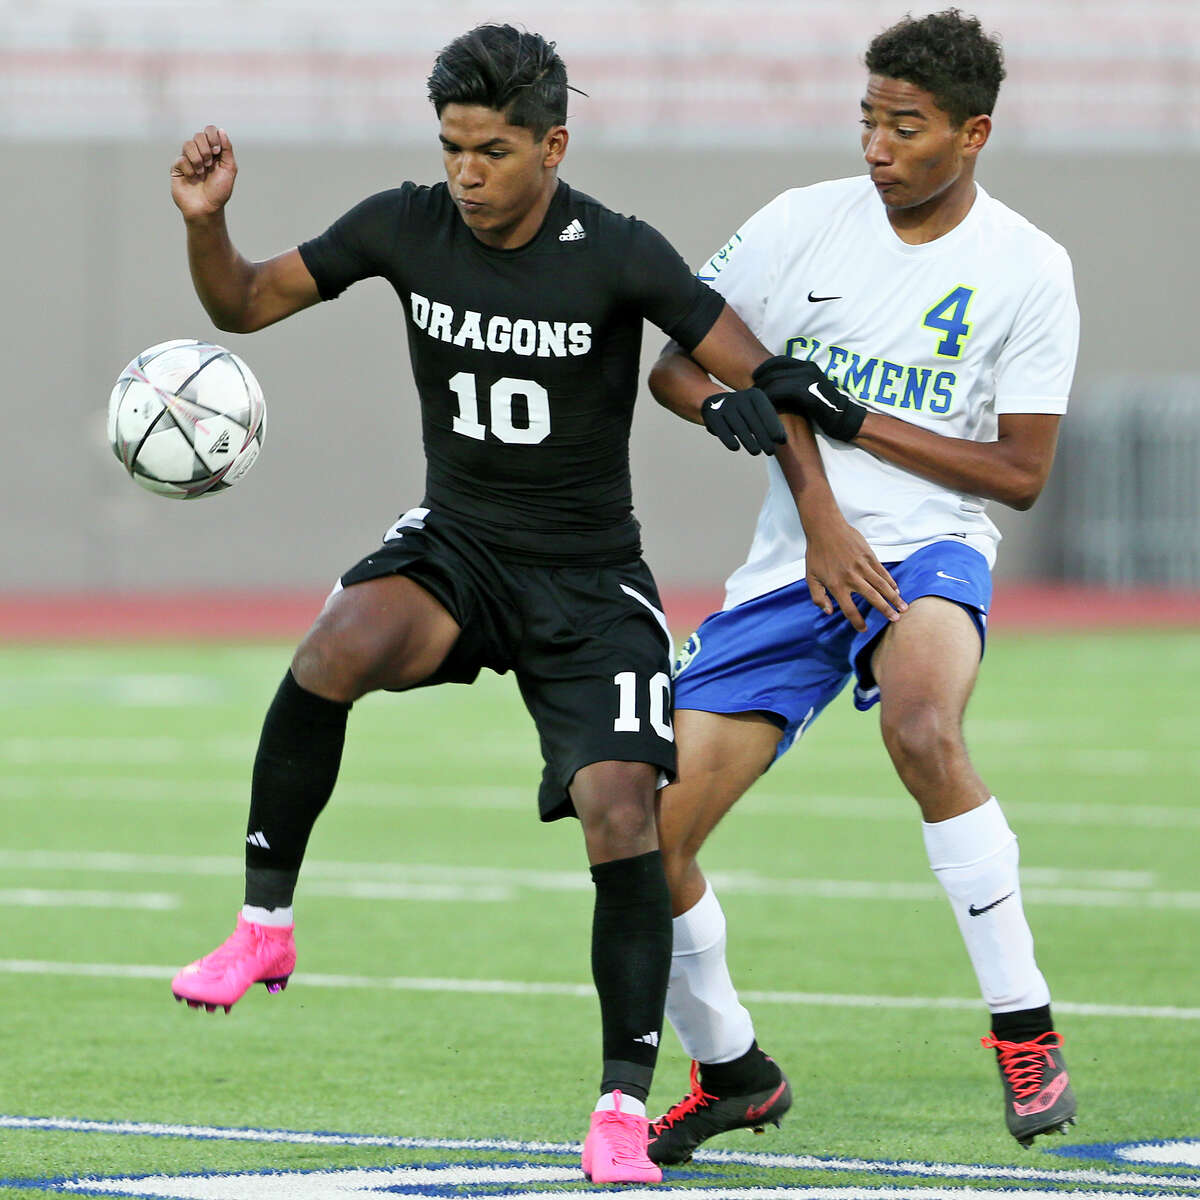 Southwest's J.P. Ortiz (left) controls the ball against Clemens' Coleton Stewart during the first half of their second round playoff game at Alamo Stadium on Friday, April 1, 2016. Clemens beat Southwest 1-0. MARVIN PFEIFFER/ mpfeiffer@express-news.net